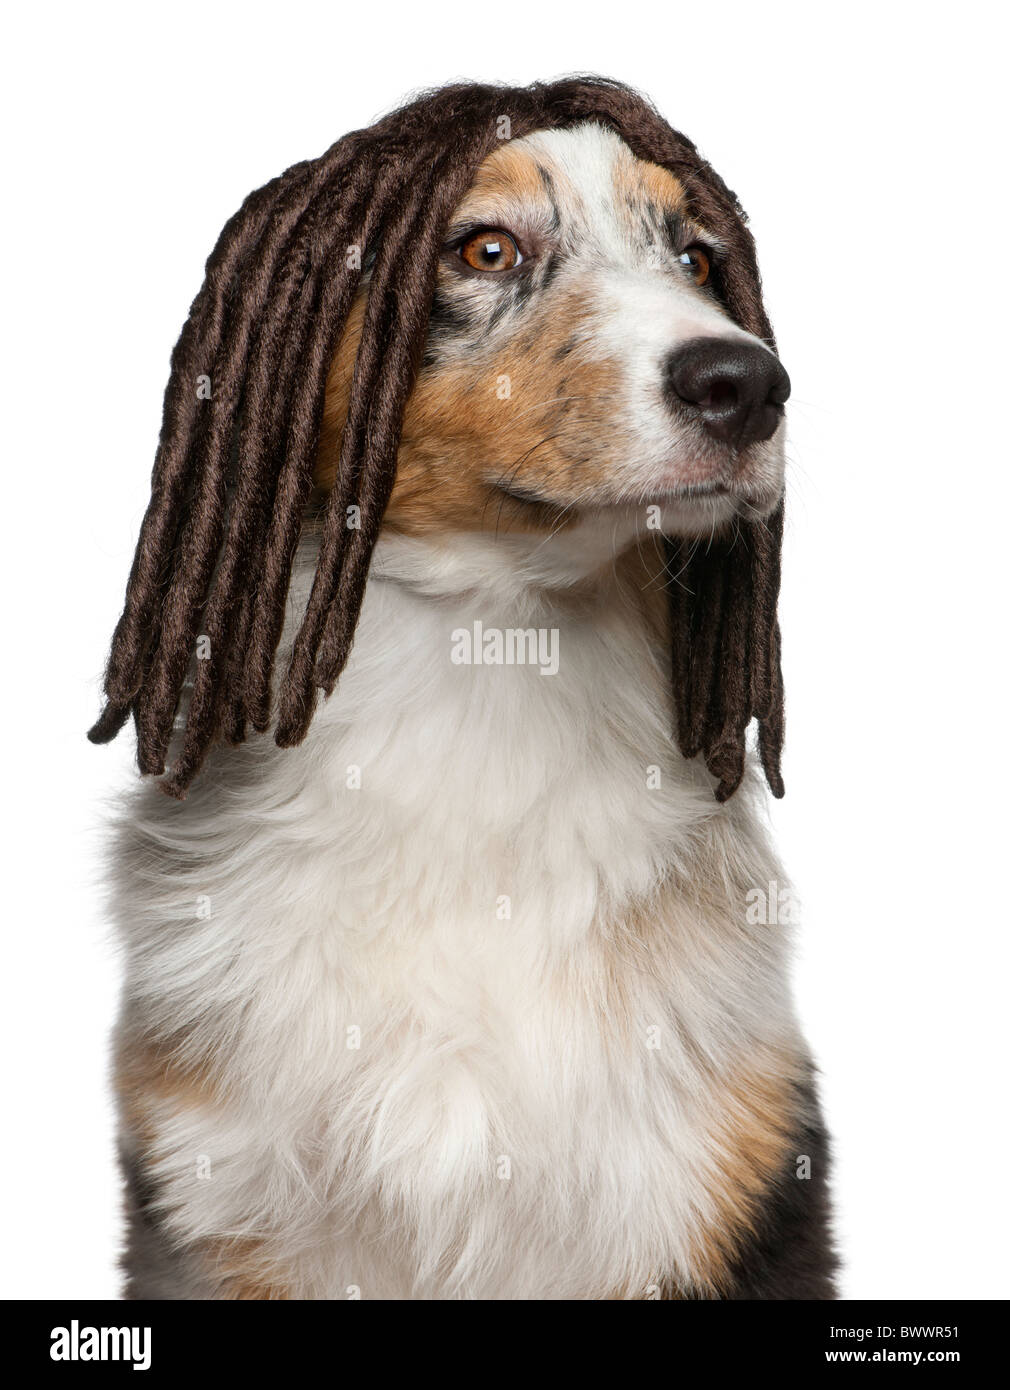 Australian Shepherd puppy wearing a dreadlock wig, 5 months old, in front of white background Stock Photo